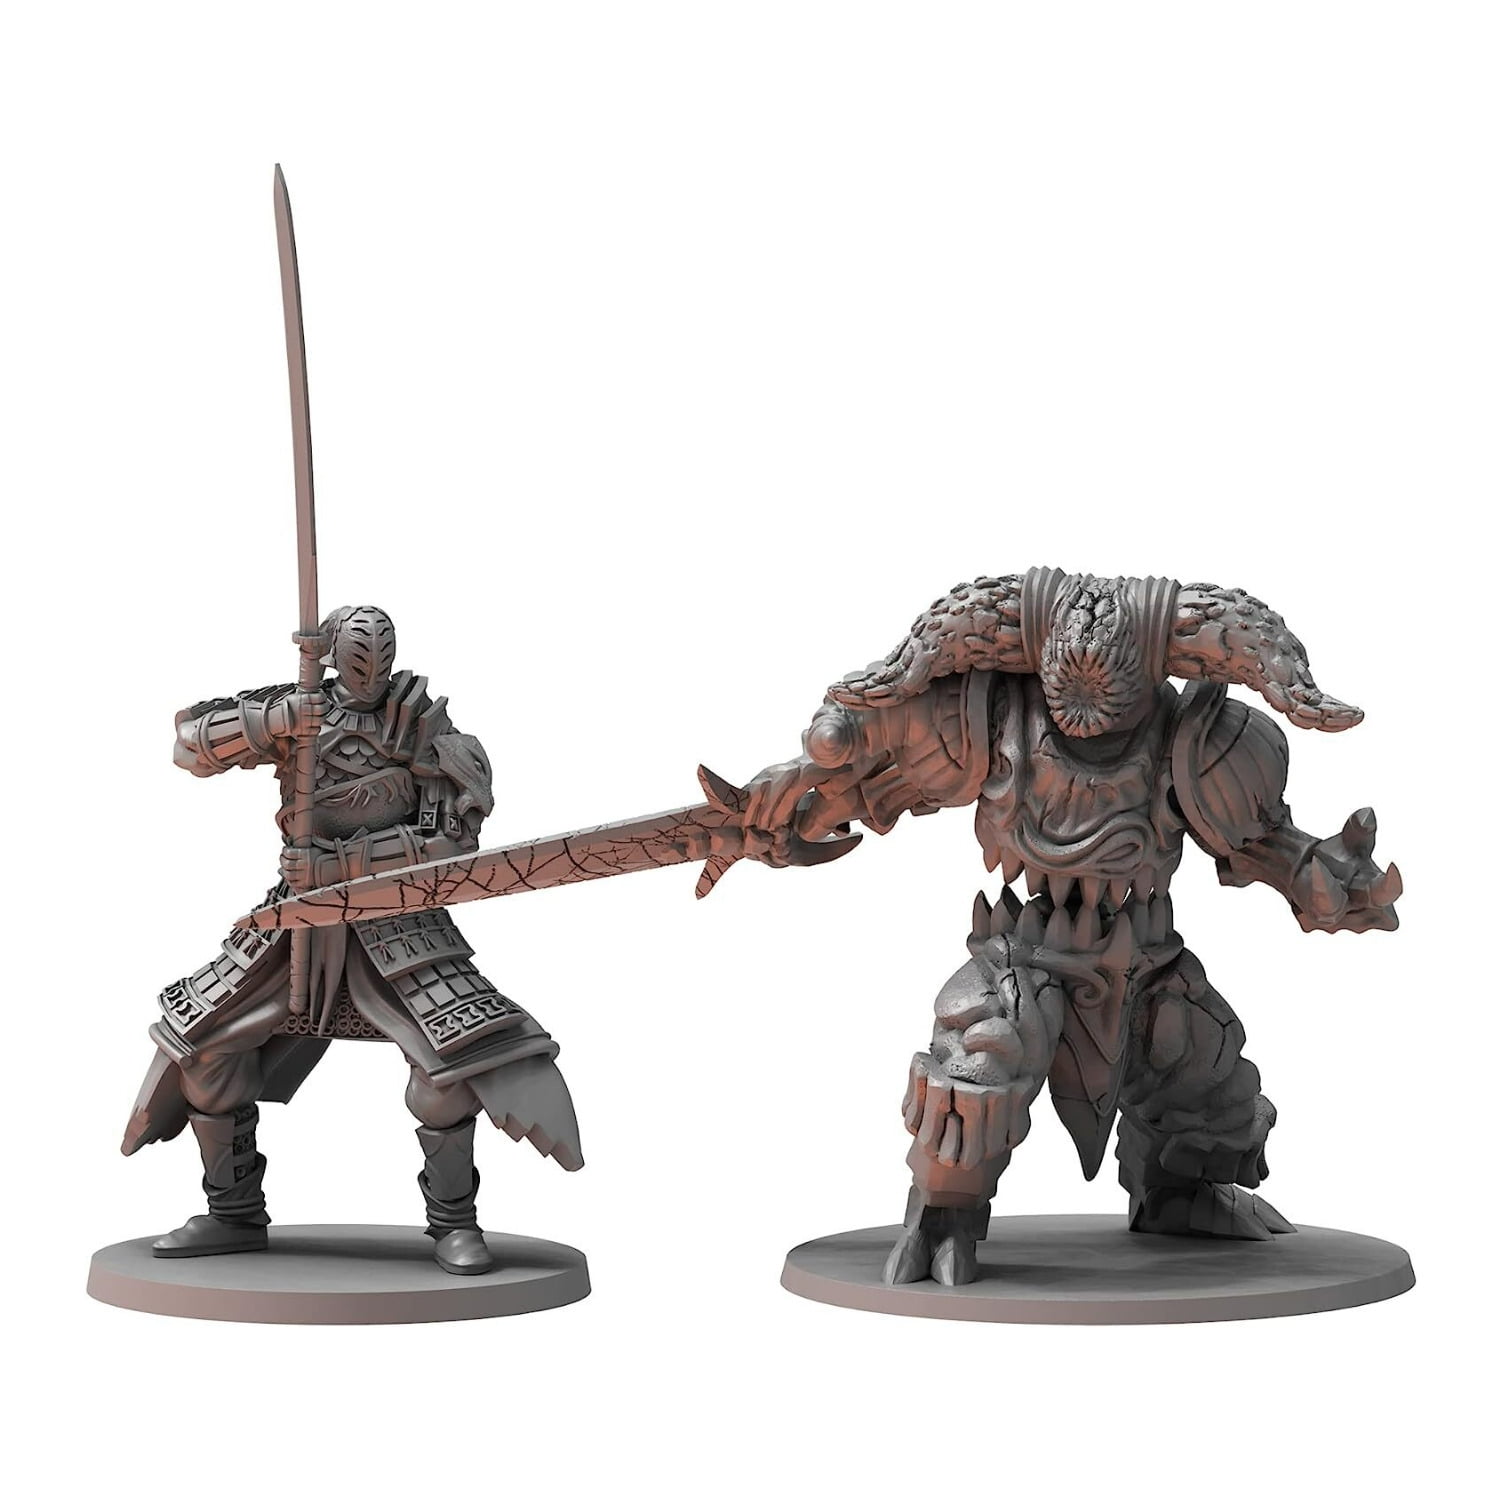 Picture of Steamforged Games STEDS-RPG014 Dark Soul Mini Sir Alonne & Smelter Demon Figurine